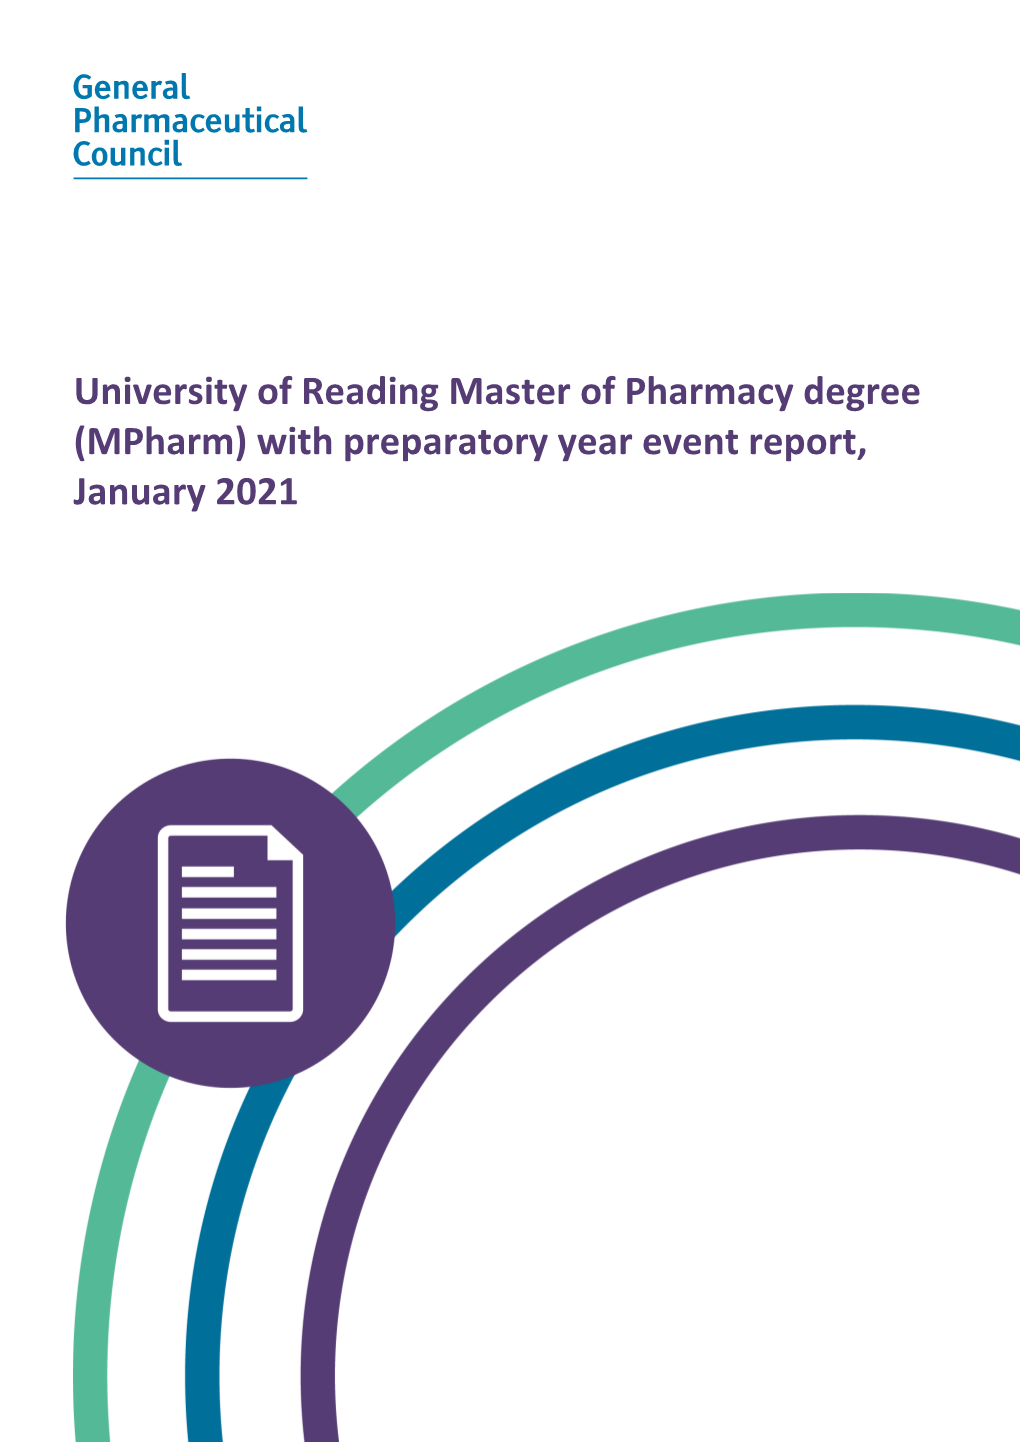 (Mpharm) with Preparatory Year Event Report, January 2021